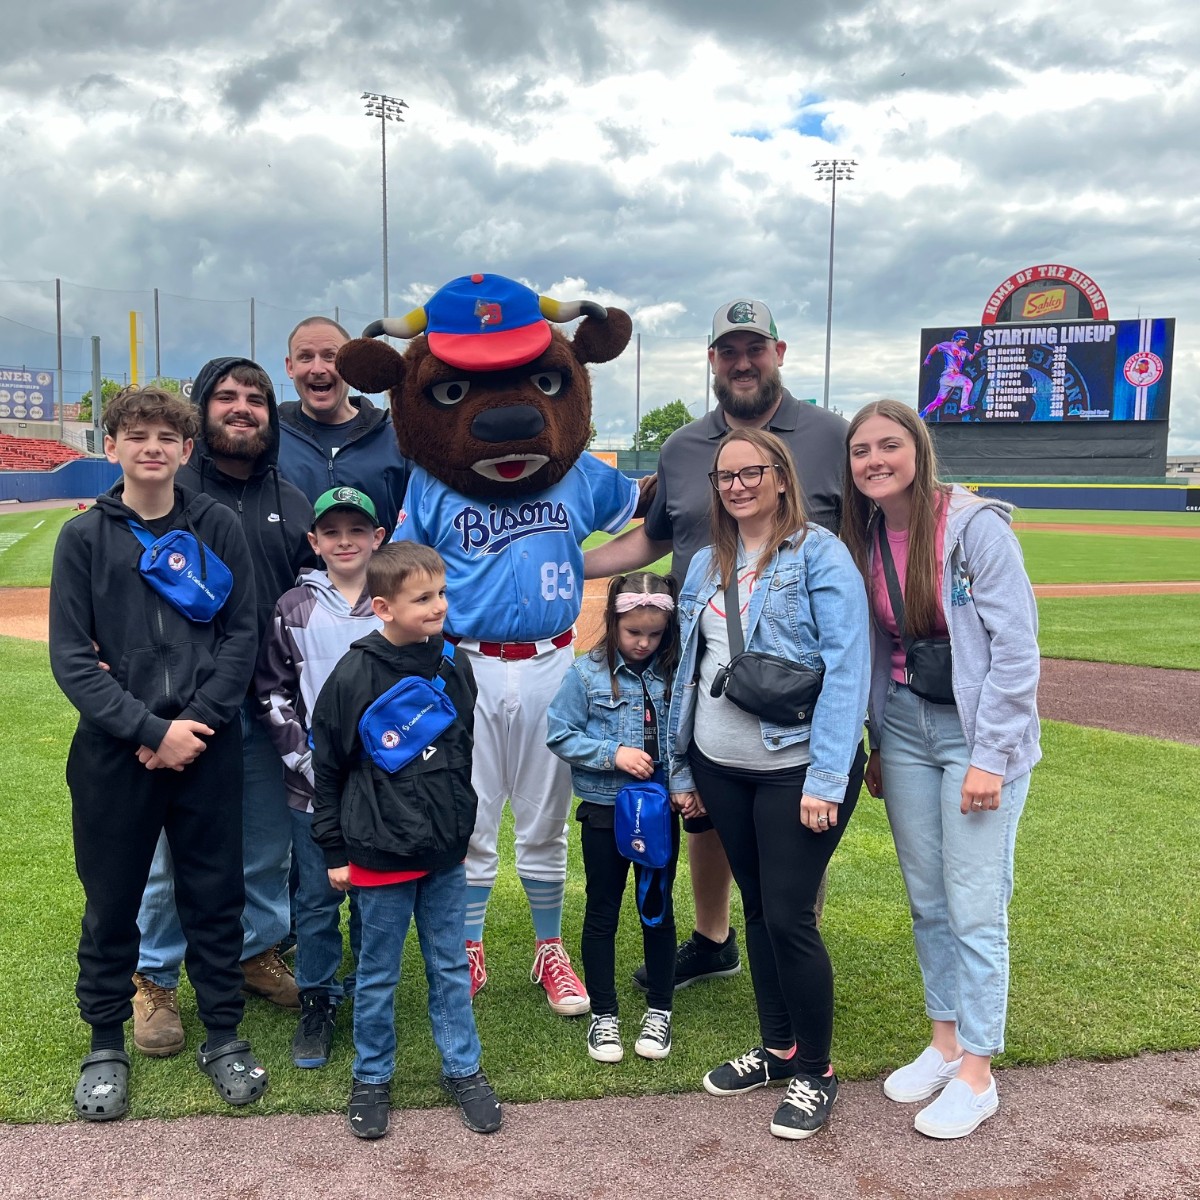 ⚾♥️ Batter up! Earlier this week we kicked off National Hospital Week and Mother's Day with the @BuffaloBisons. Associates from Mercy Hospital, Ashley Schmidt and Cindy McConnell, were welcomed onto the field to throw the first pitch. #HospitalWeek #MothersDay #CHBuffalo